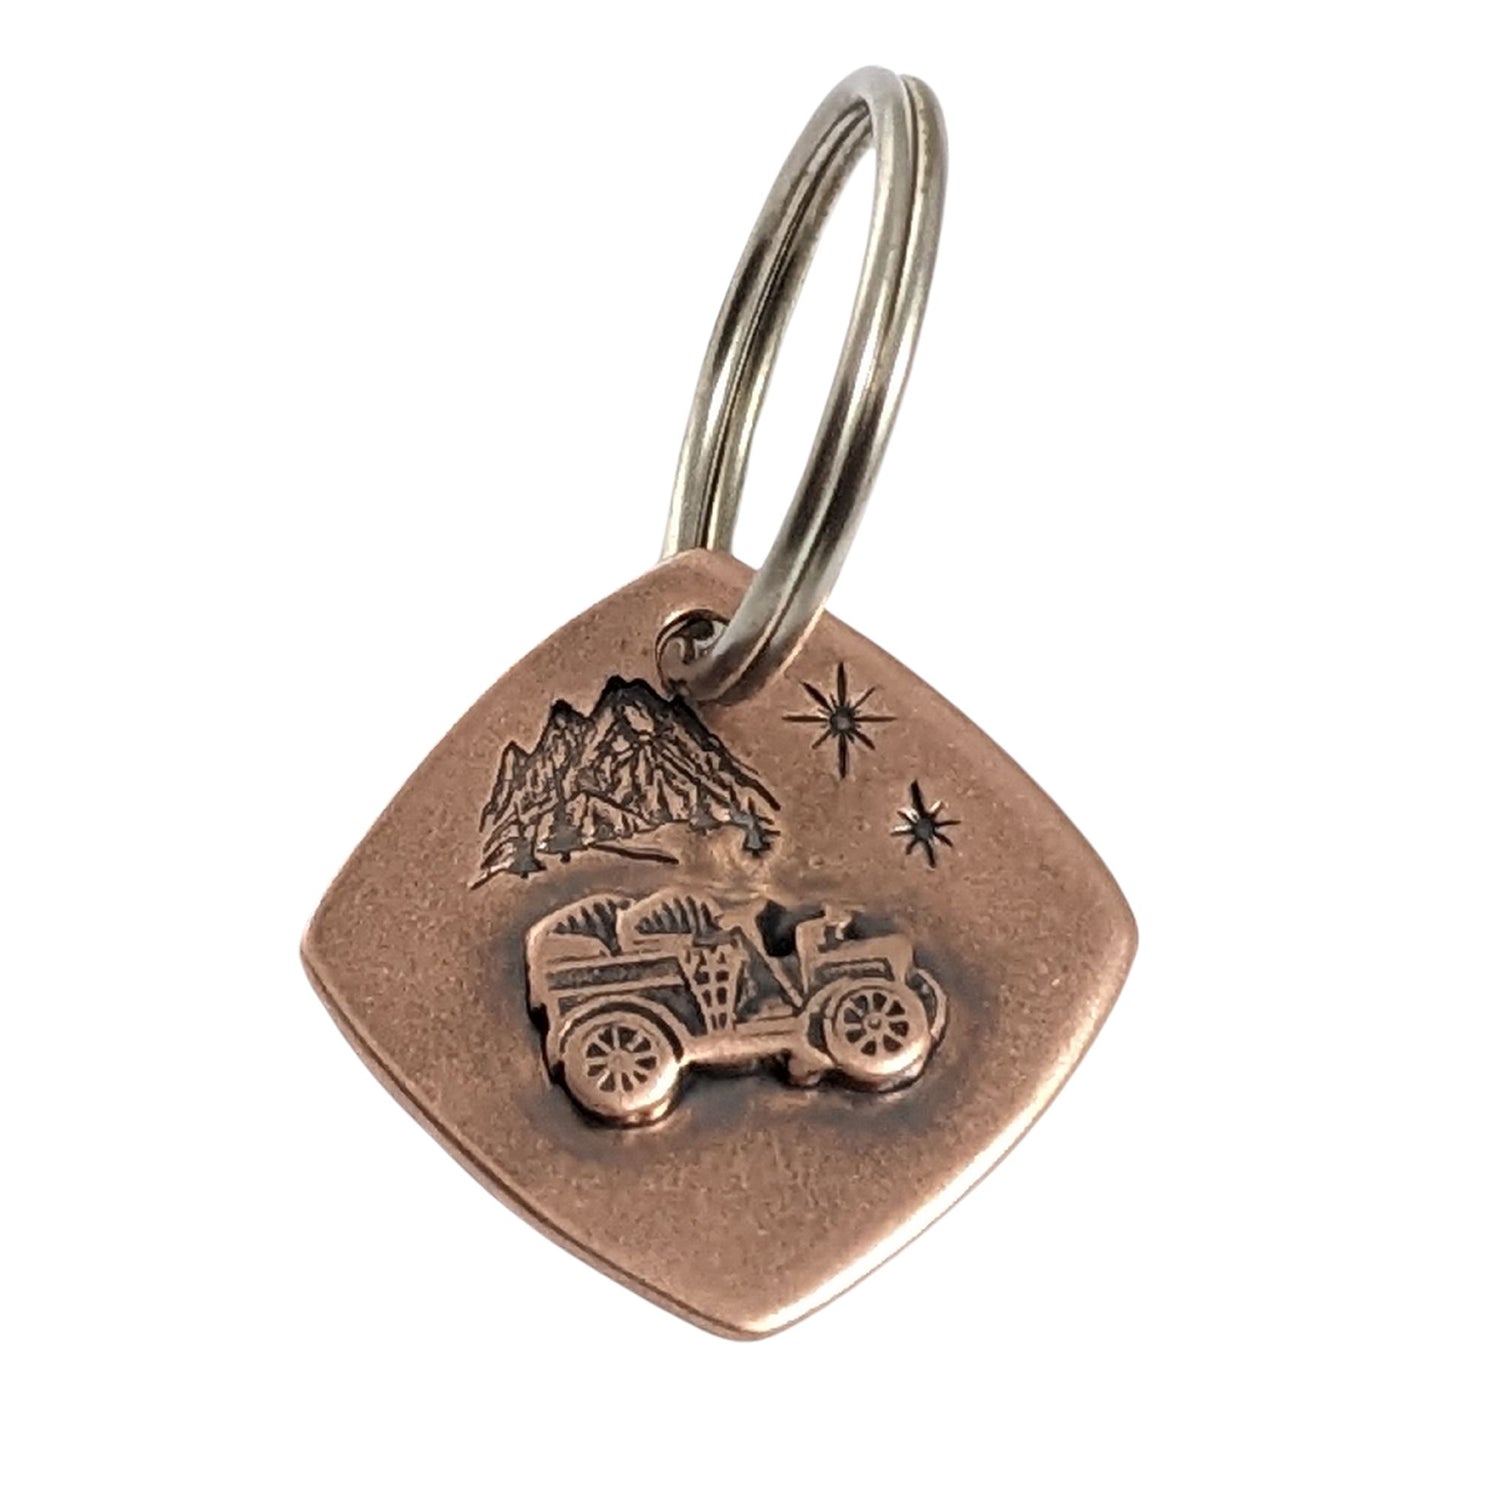 square copper keychain with raised antique car. background is mountains and sparking stars.